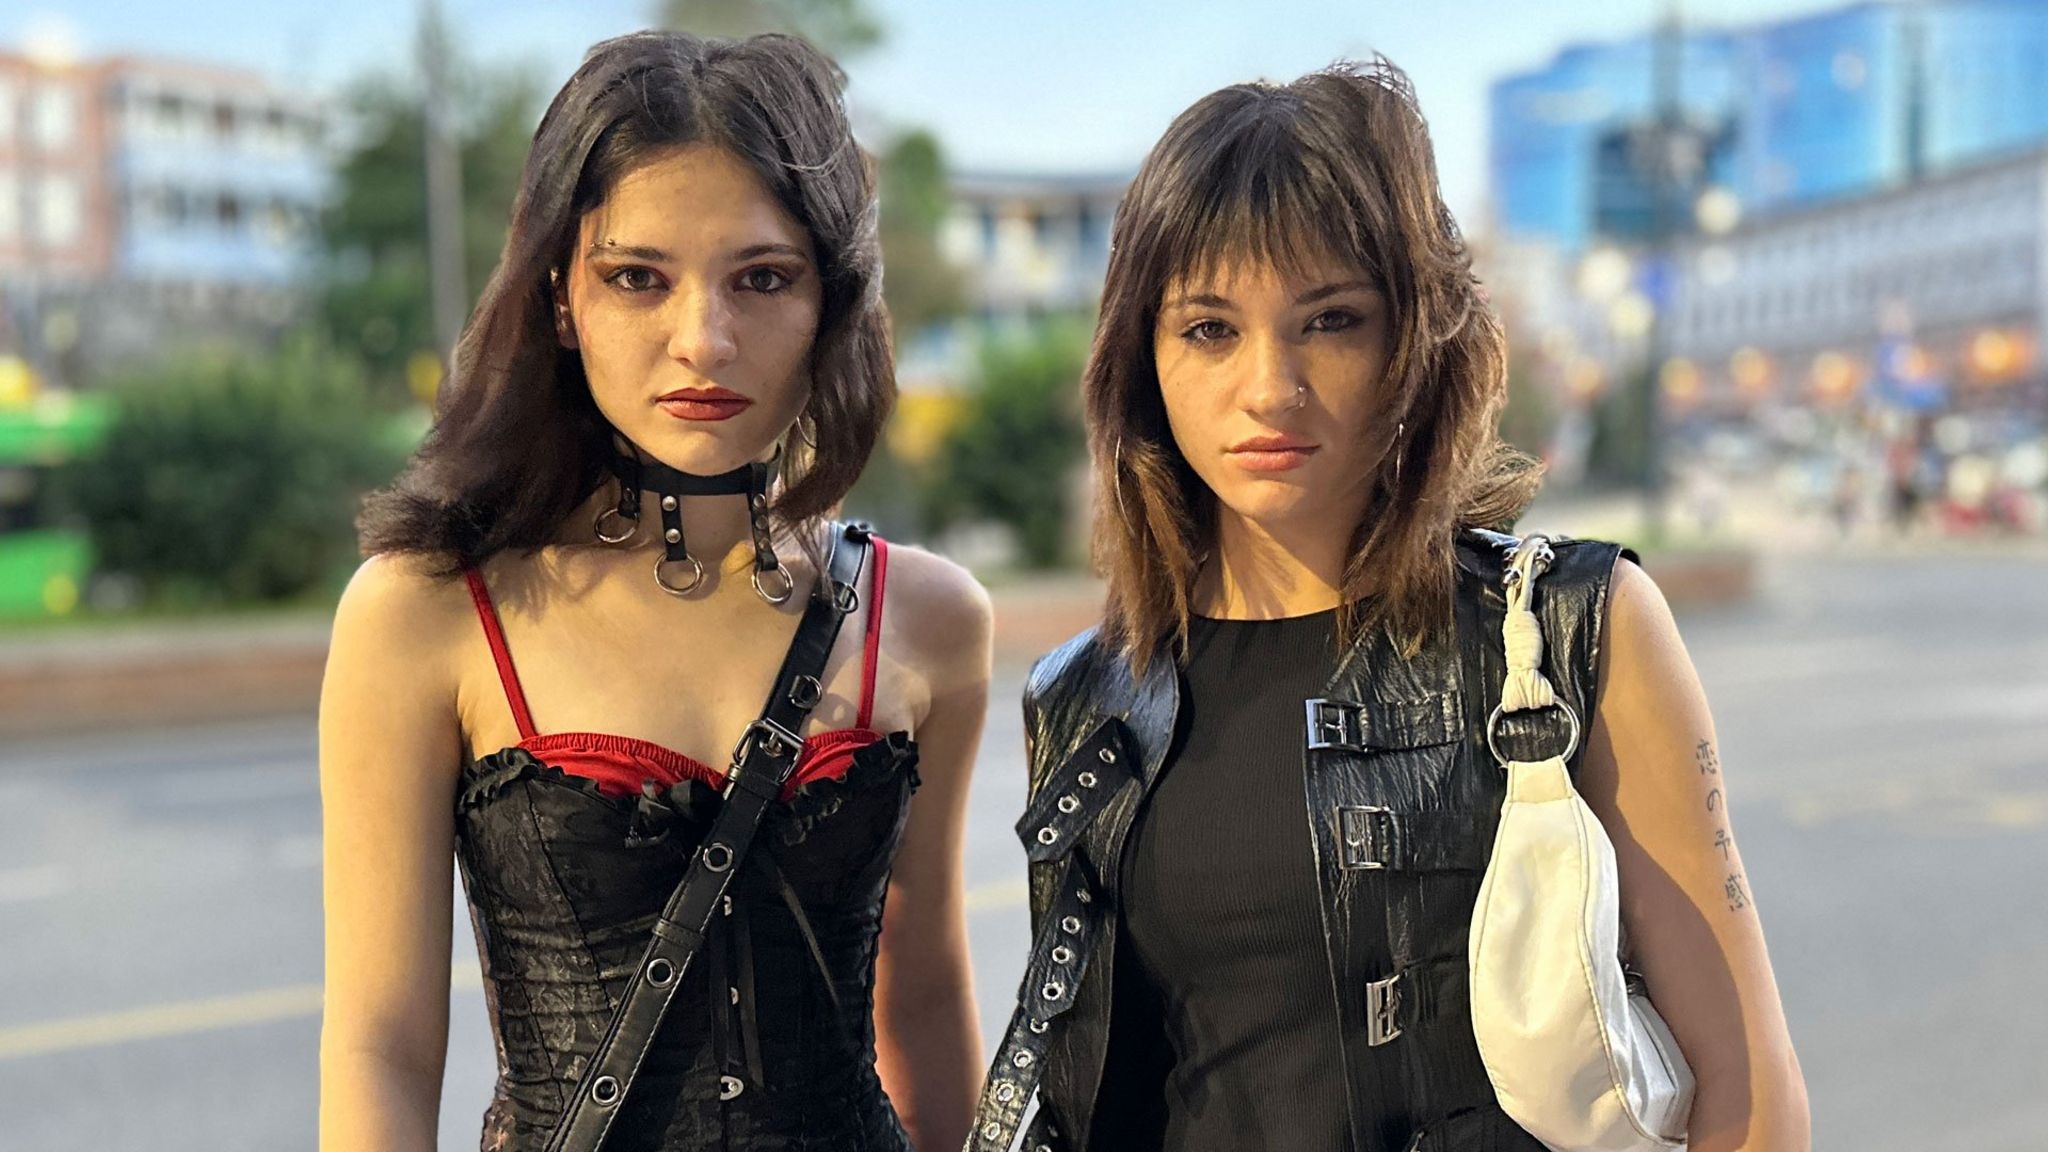 Amy Khvitia (L) and Ano Sartania (R) dressed in black standing in the street